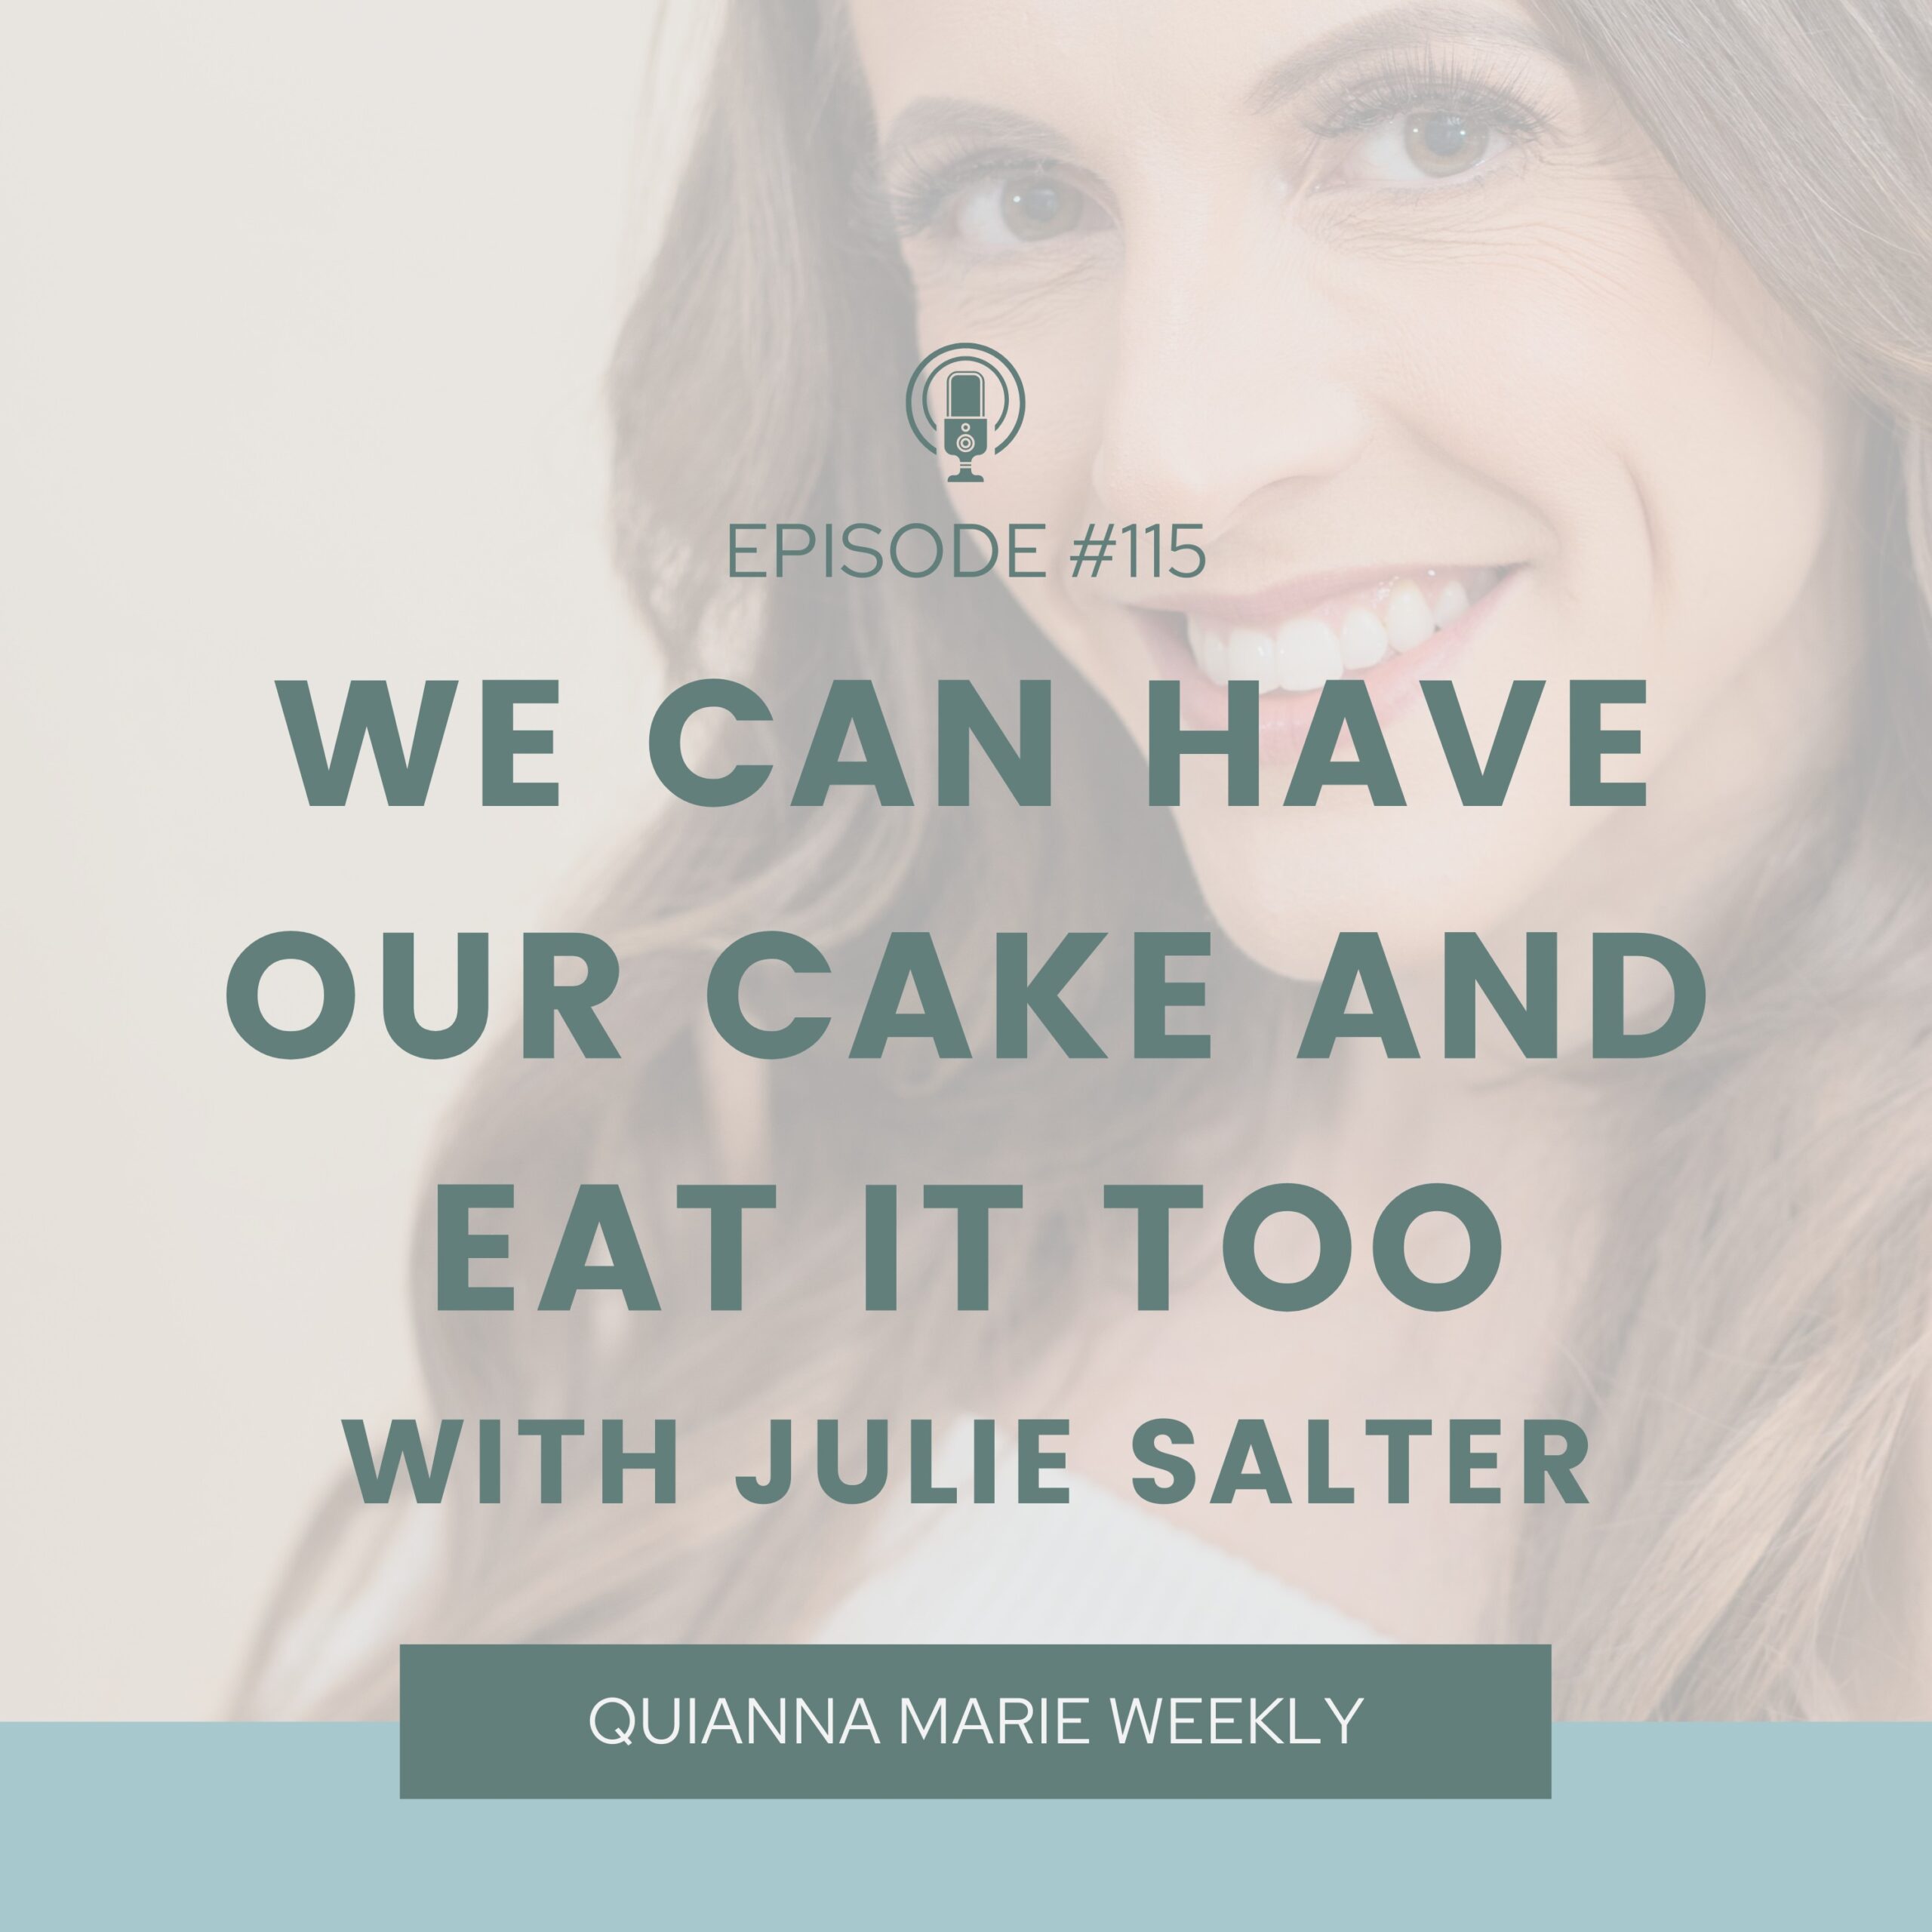 Fitness, Wellness and Health Podcast Featuring Julie Salter and Quianna Marie